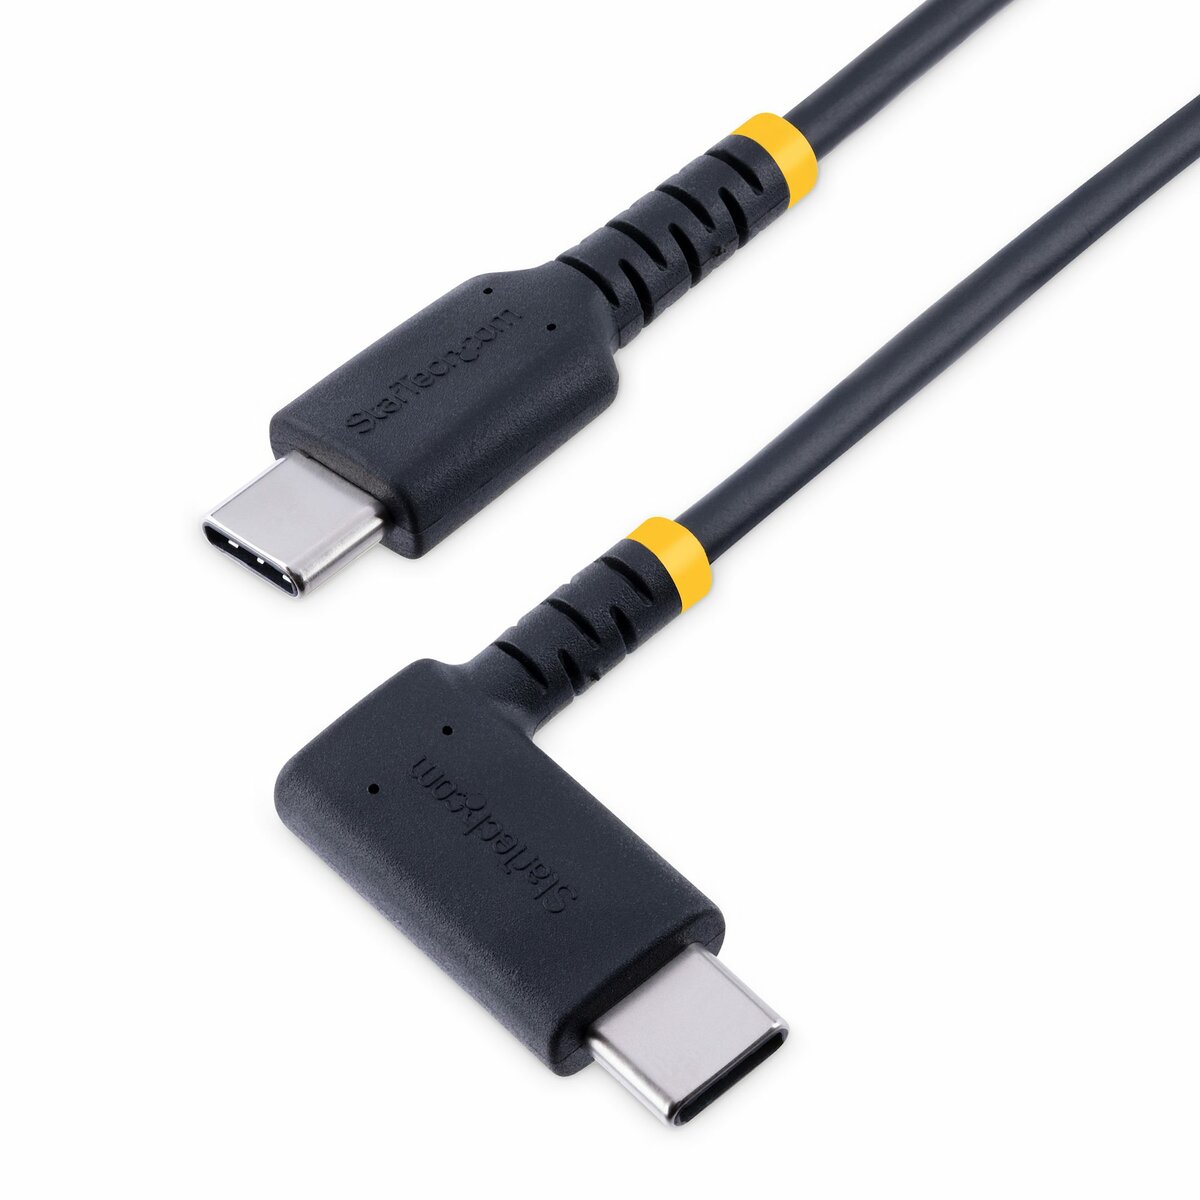 1m USB C Charging Cable - Durable Fast Charge & Sync USB 2.0 Type C to USB  C Laptop Charger Cord - TPE Jacket Aramid Fiber M/M 60W Black - Samsung S10